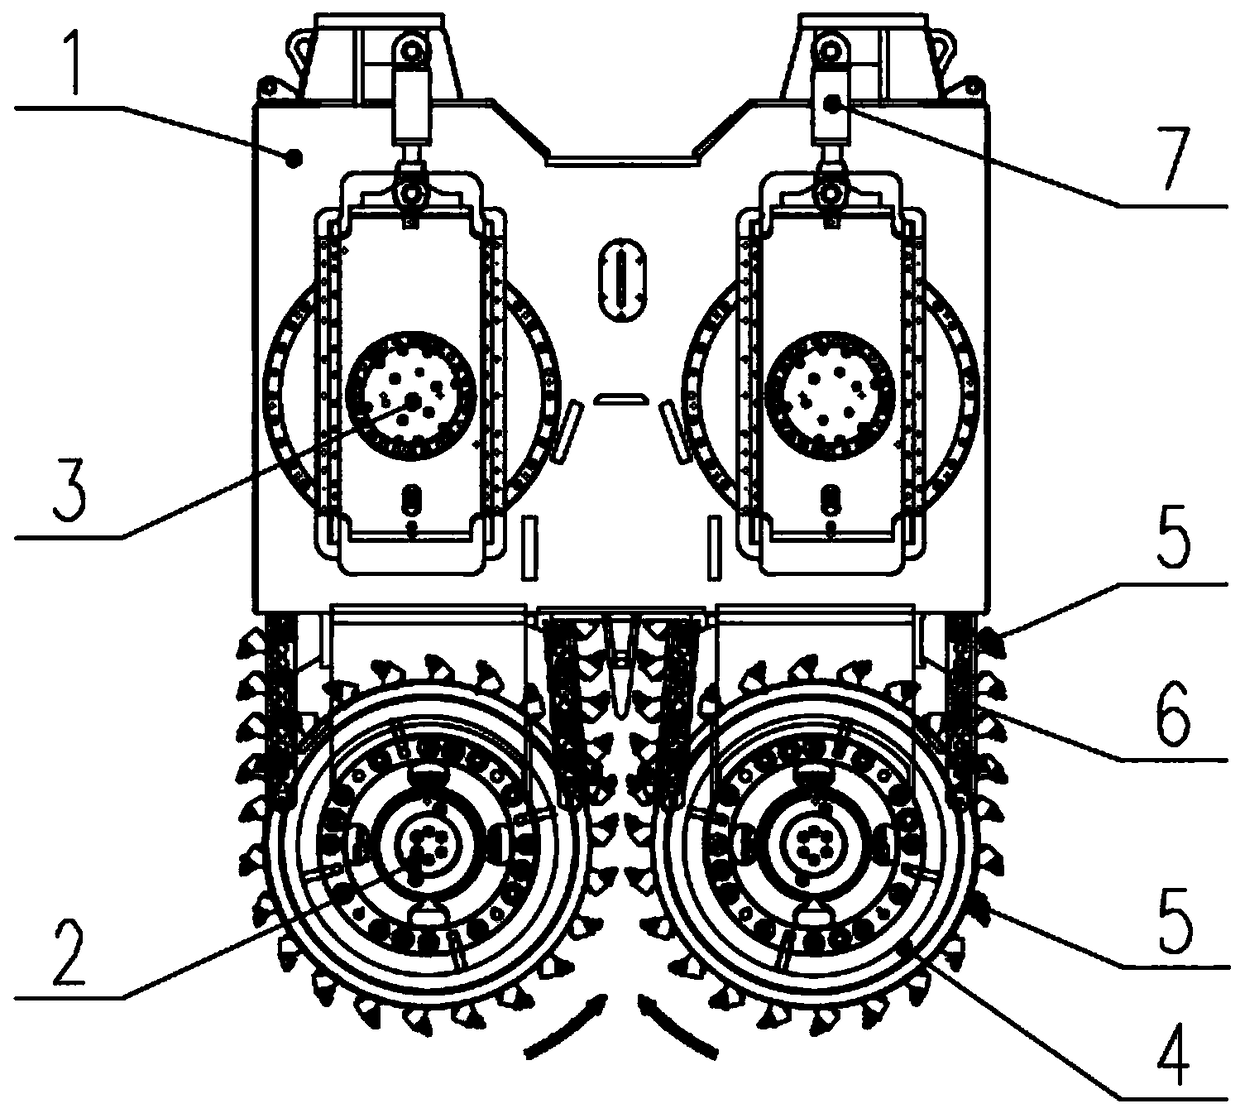 Double-wheel slot milling machine based on sprocket transmission and milling, and slot forming method